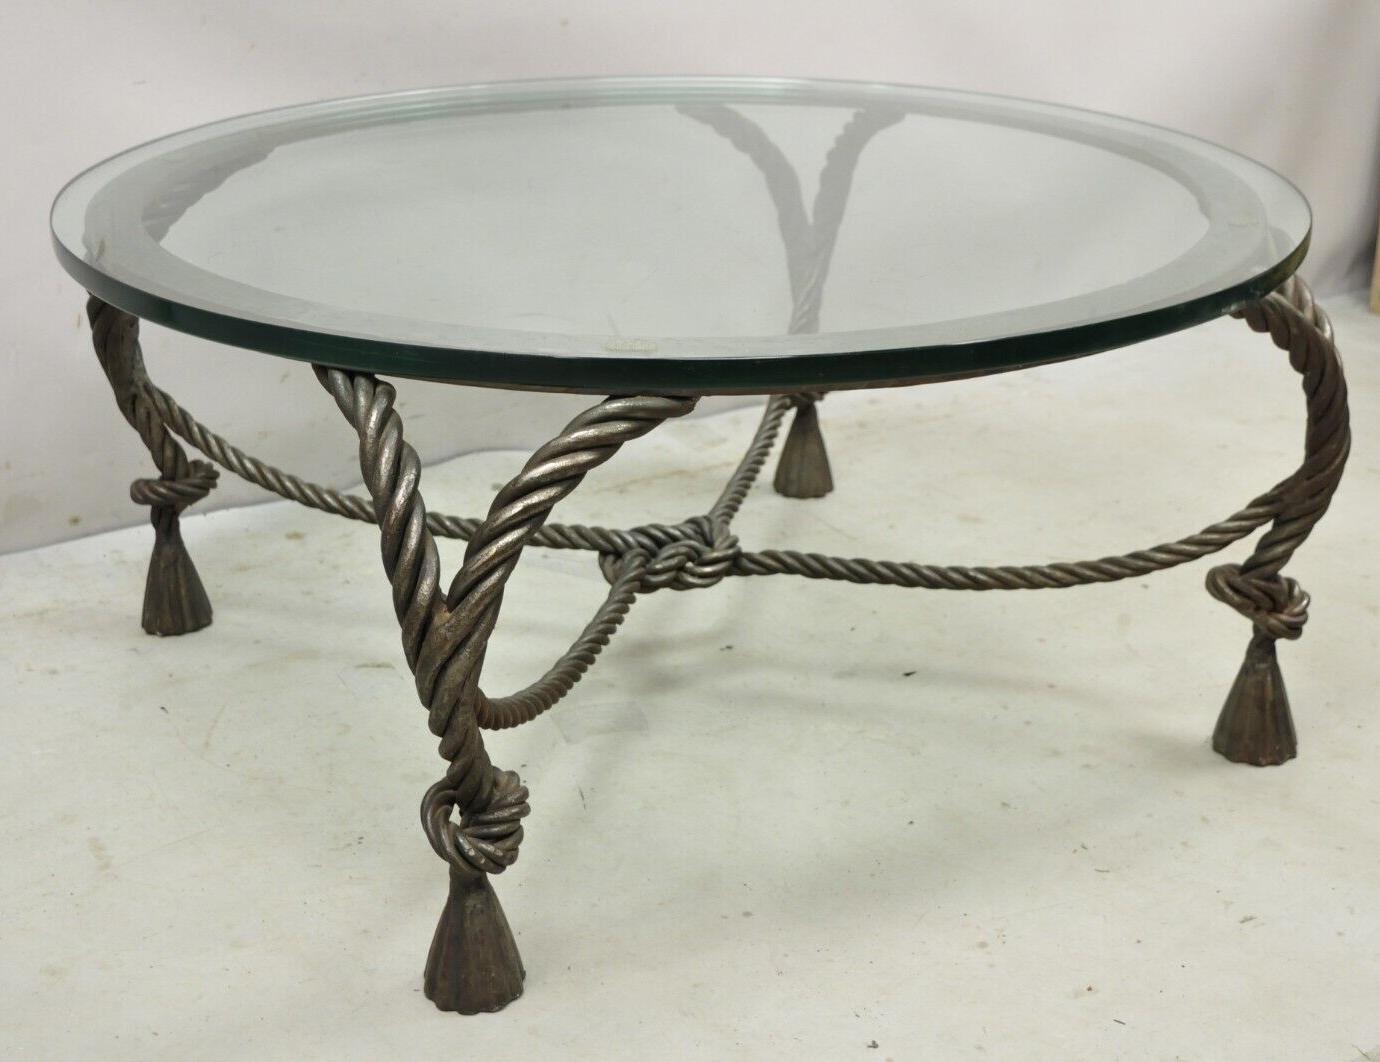 Italian Hollywood Regency Steel Knotted Rope and Tassel Round Glass Coffee Table. Item features a heavy high quality steel metal frame, knotted rope and tassel design, thick round glass top, stamped 